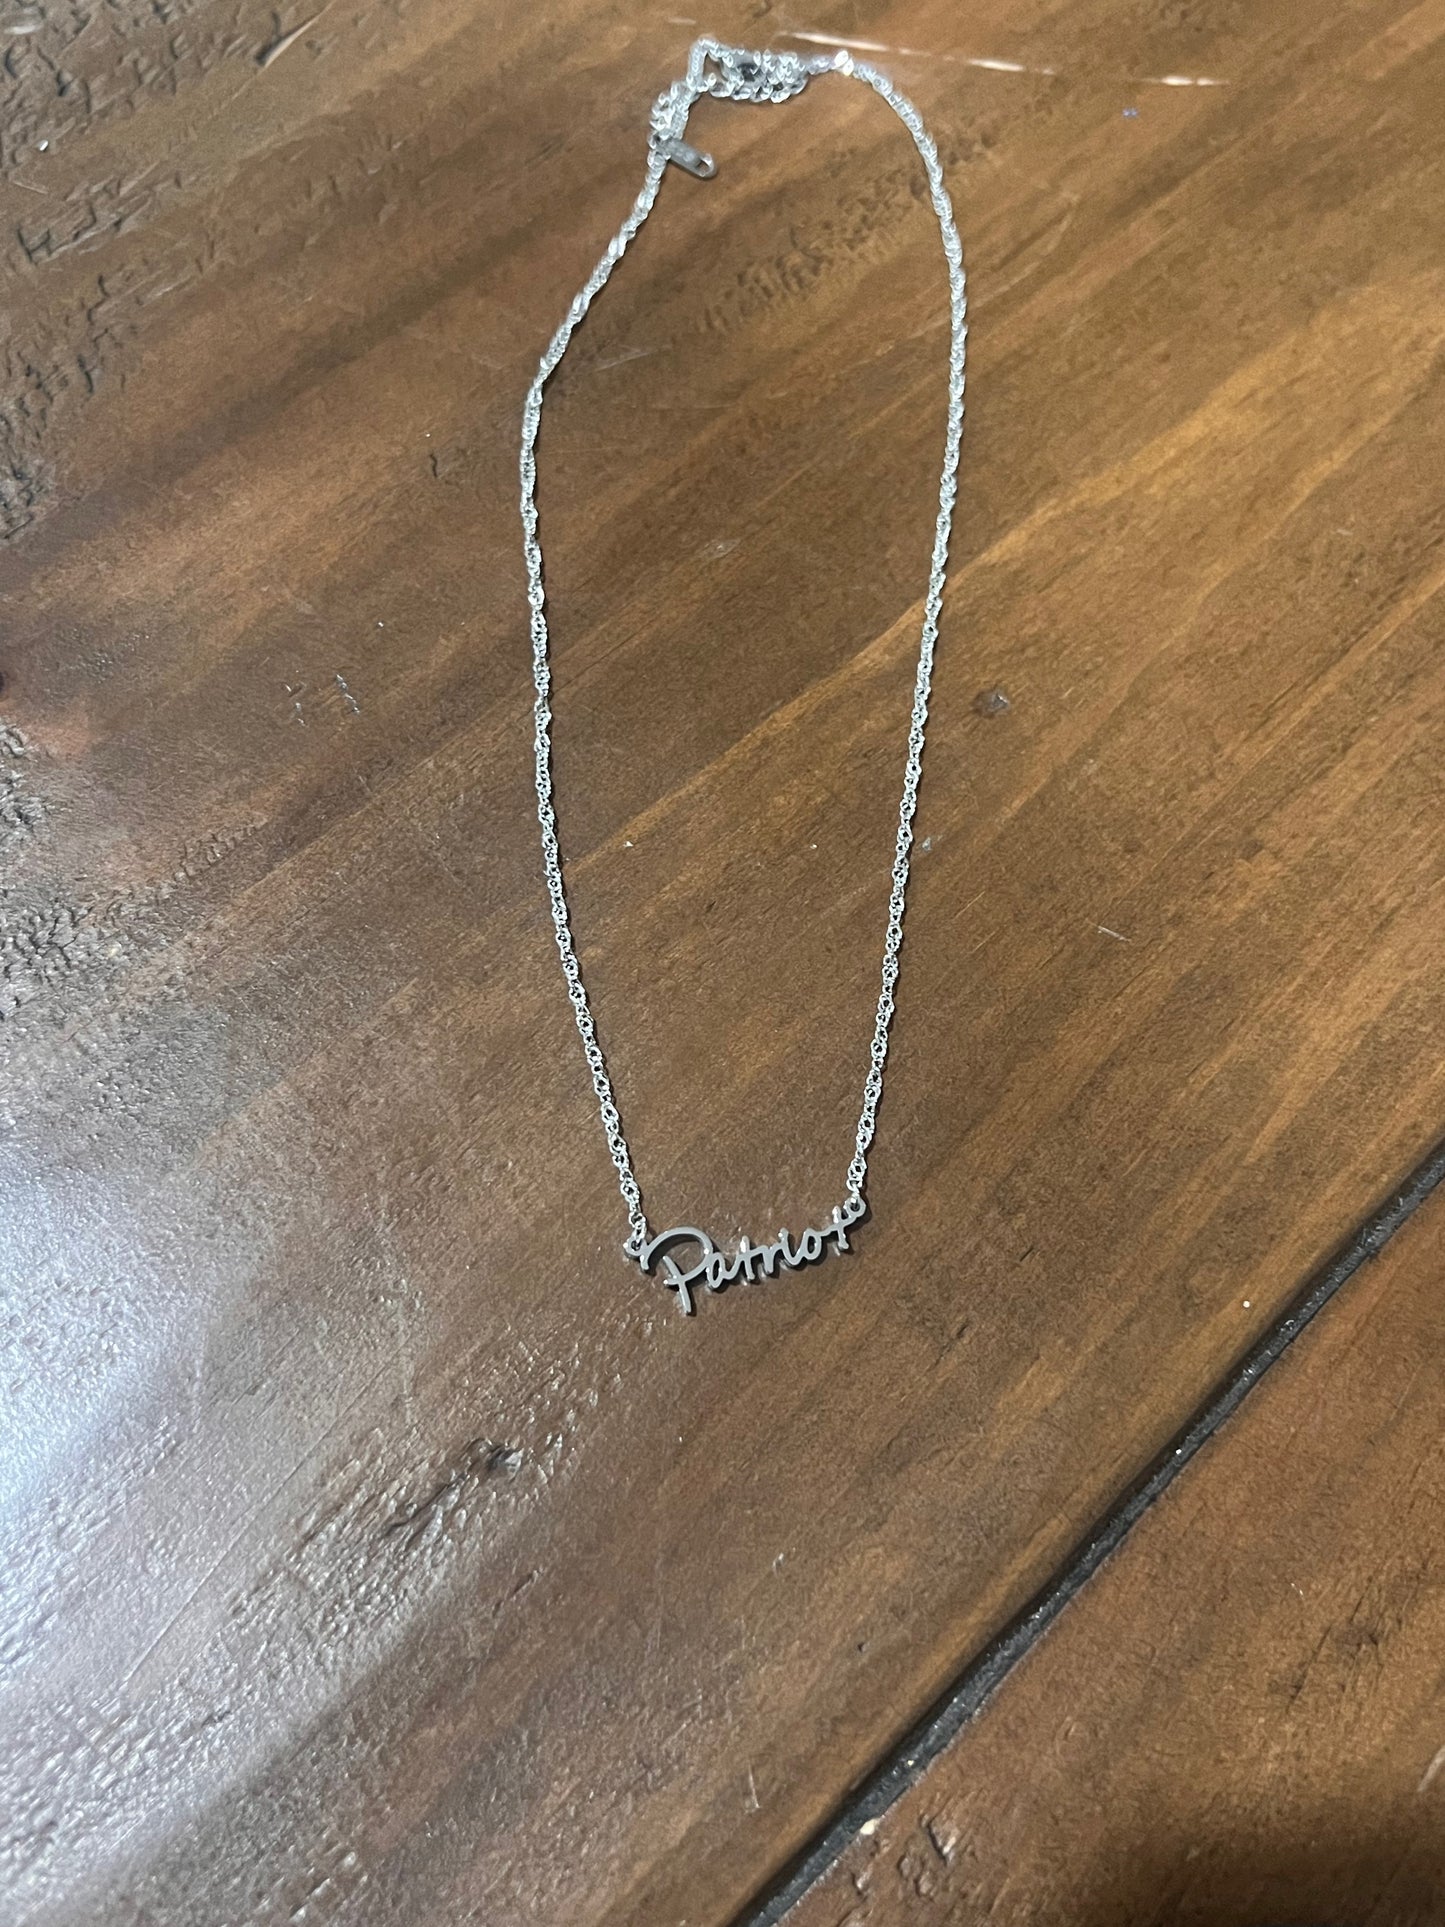 The Patriot Necklace